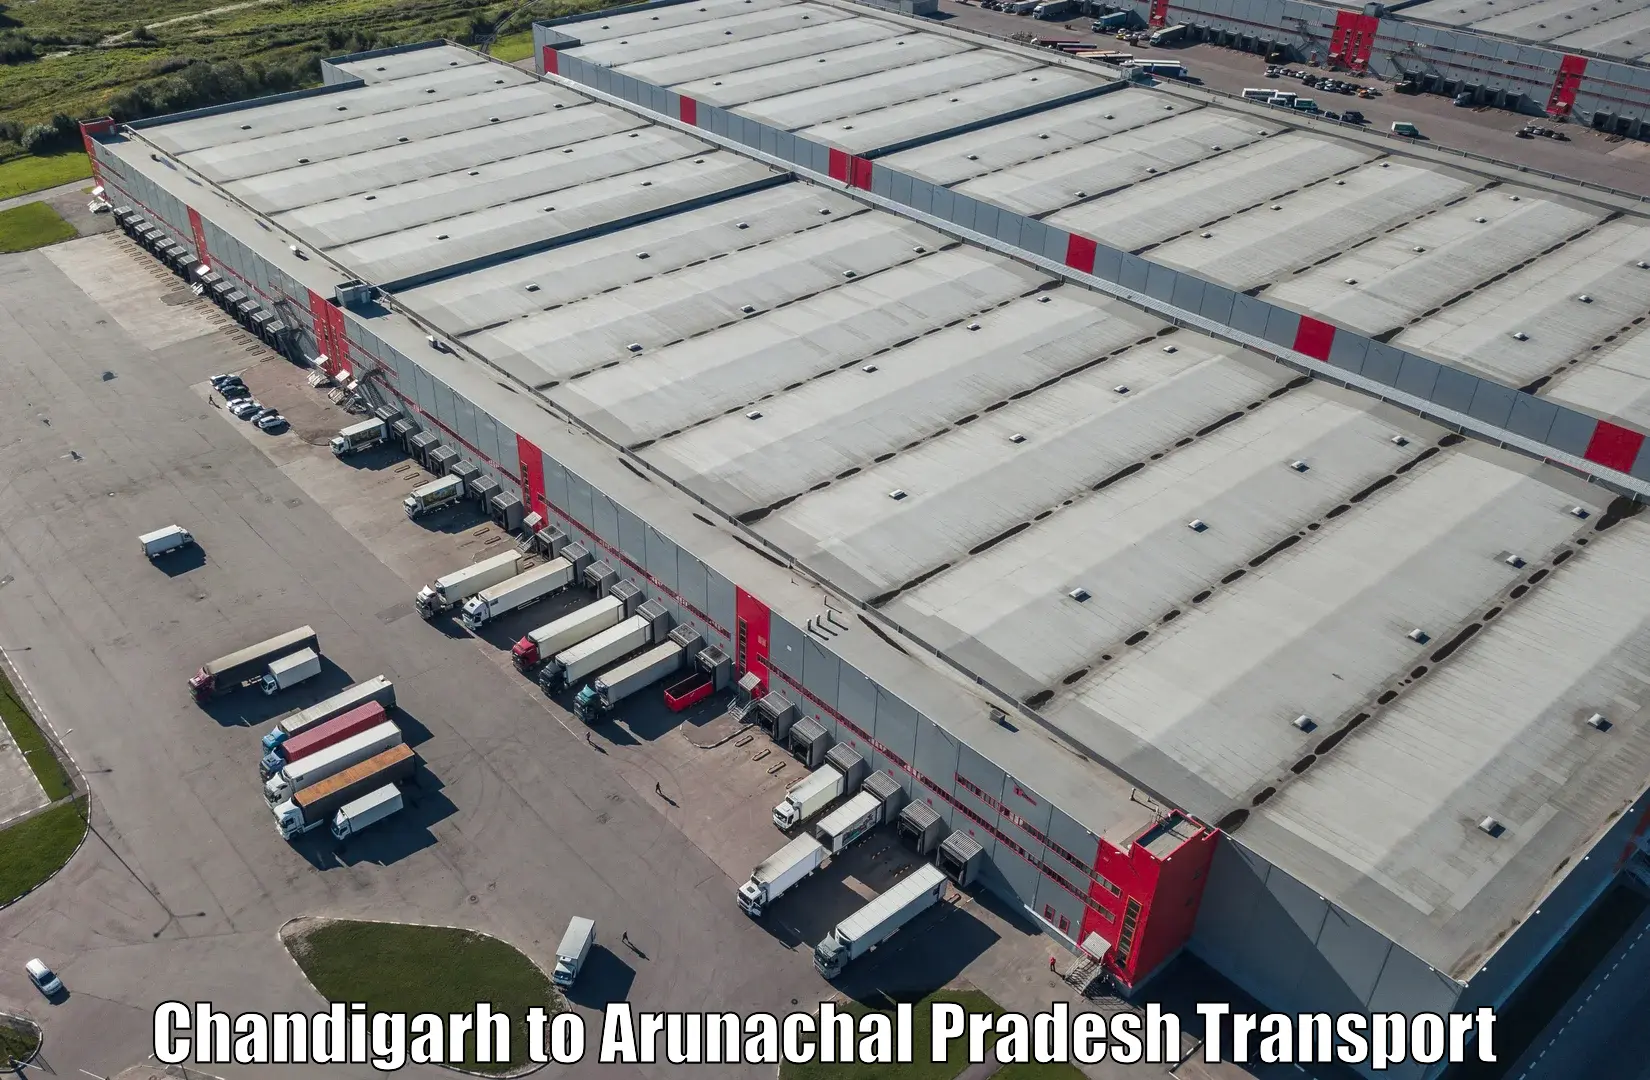 Land transport services in Chandigarh to Deomali